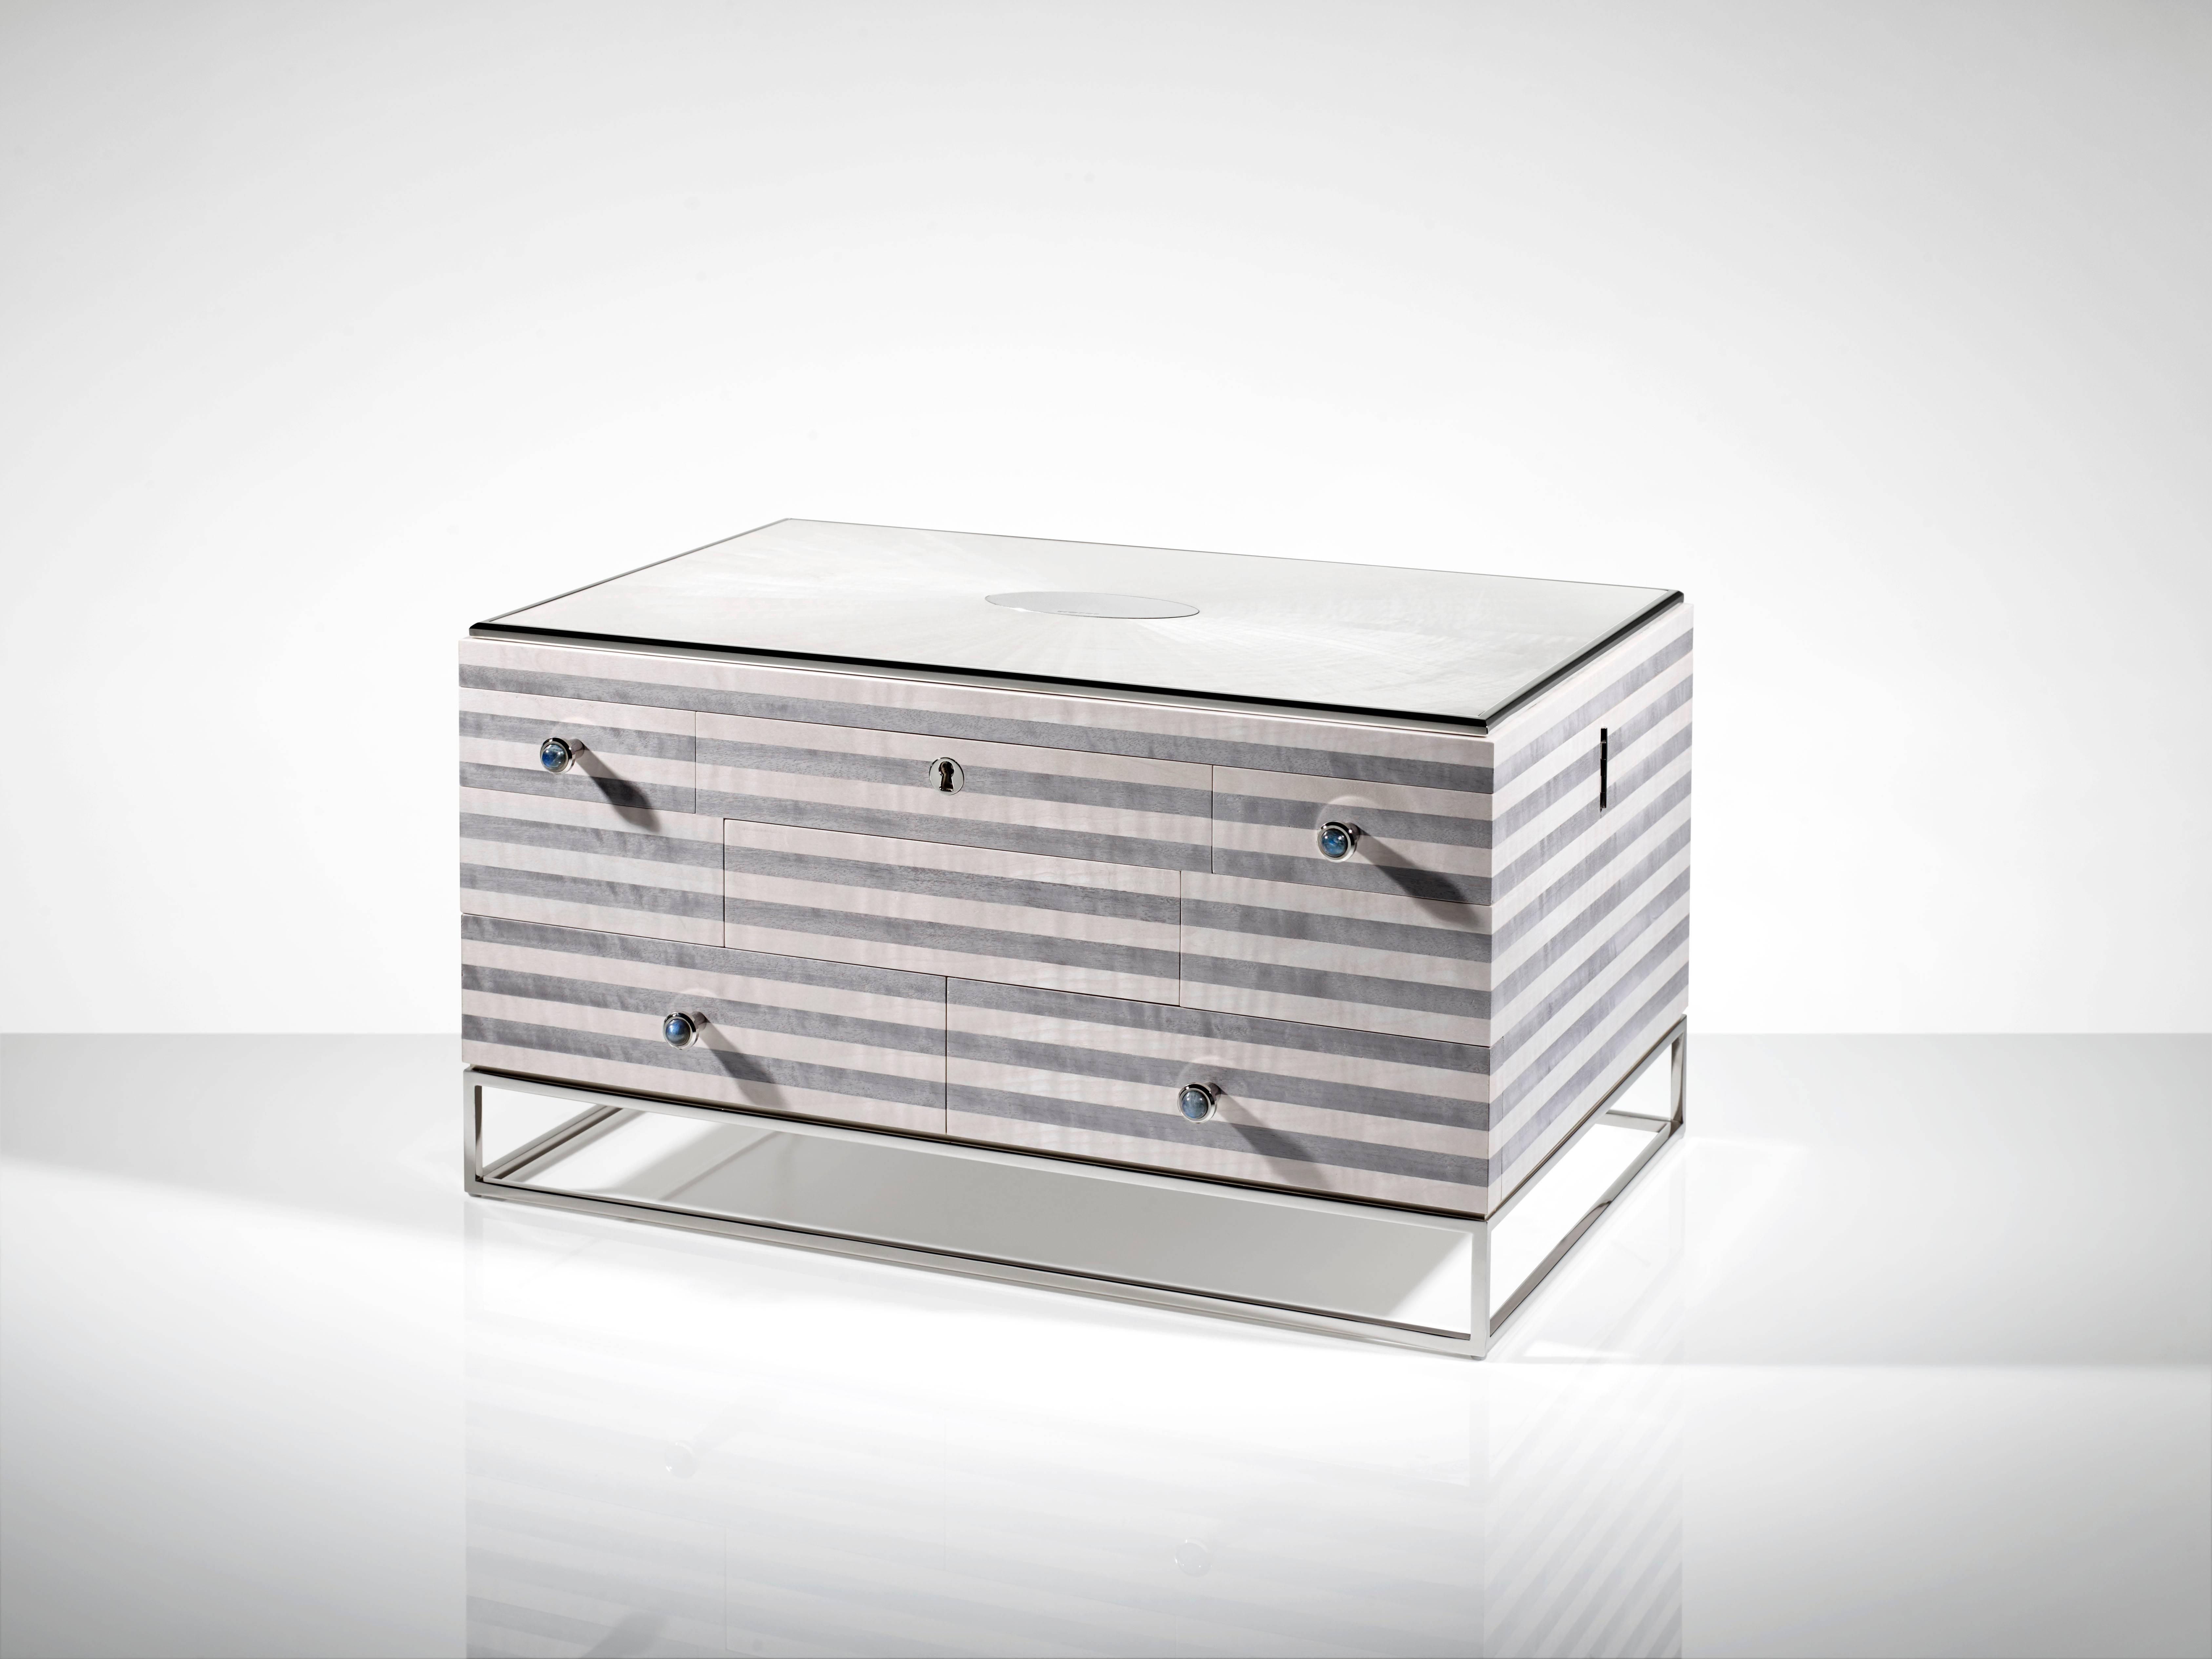 For its latest creation, a jewellery box, the Linley designers have taken inspiration from the magnificent stripe pattern adorning the interior of the Duomo of Siena. While the Duomo interior walls were created in alternating white and black marble